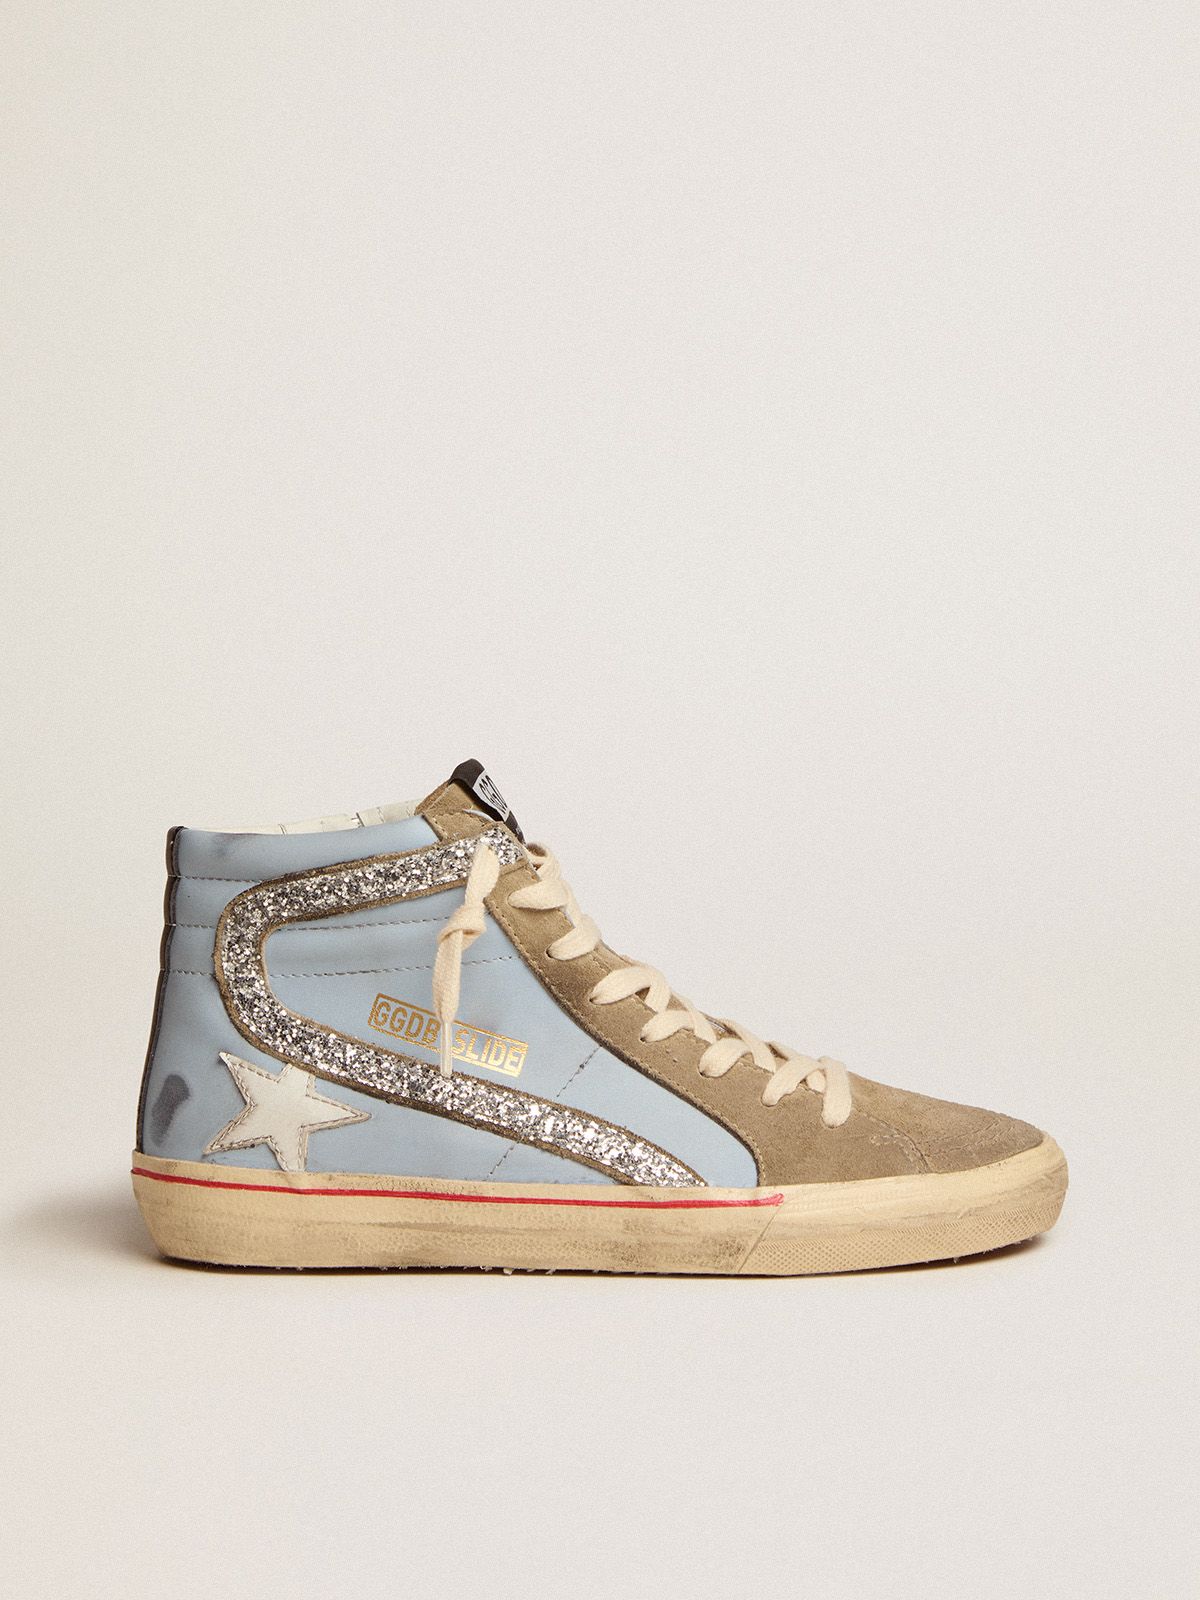 golden goose leather dove-gray in and glitter sneakers silver flash powder-blue suede with tongue Slide